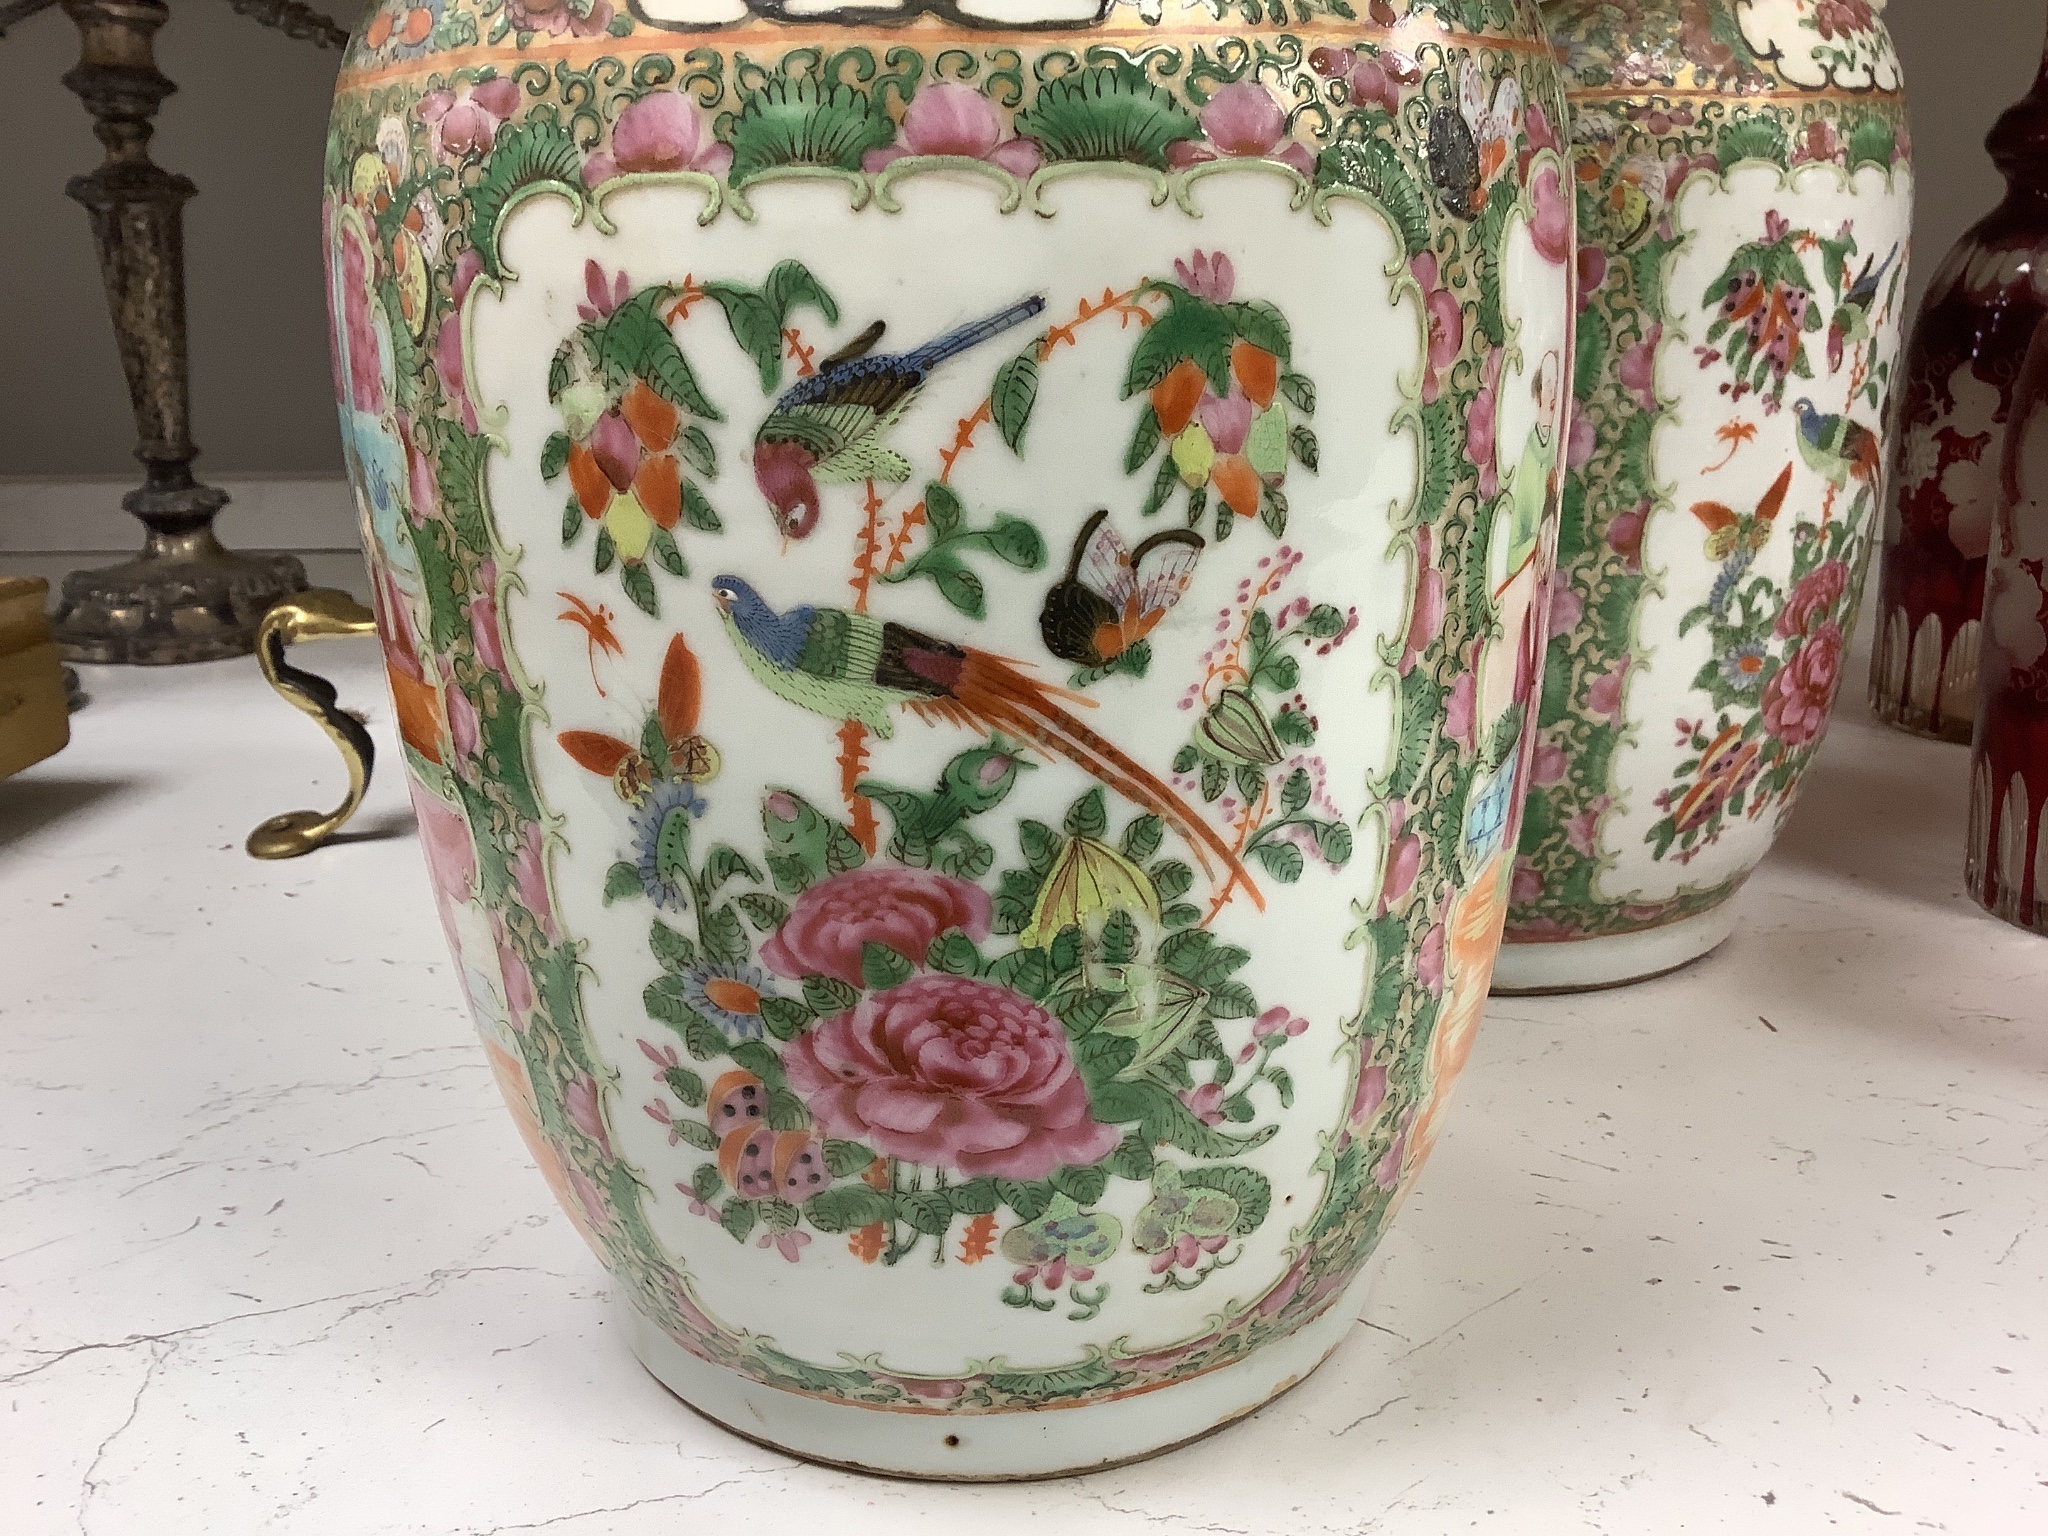 A pair of 19th century Chinese famille rose vases, height 36cm